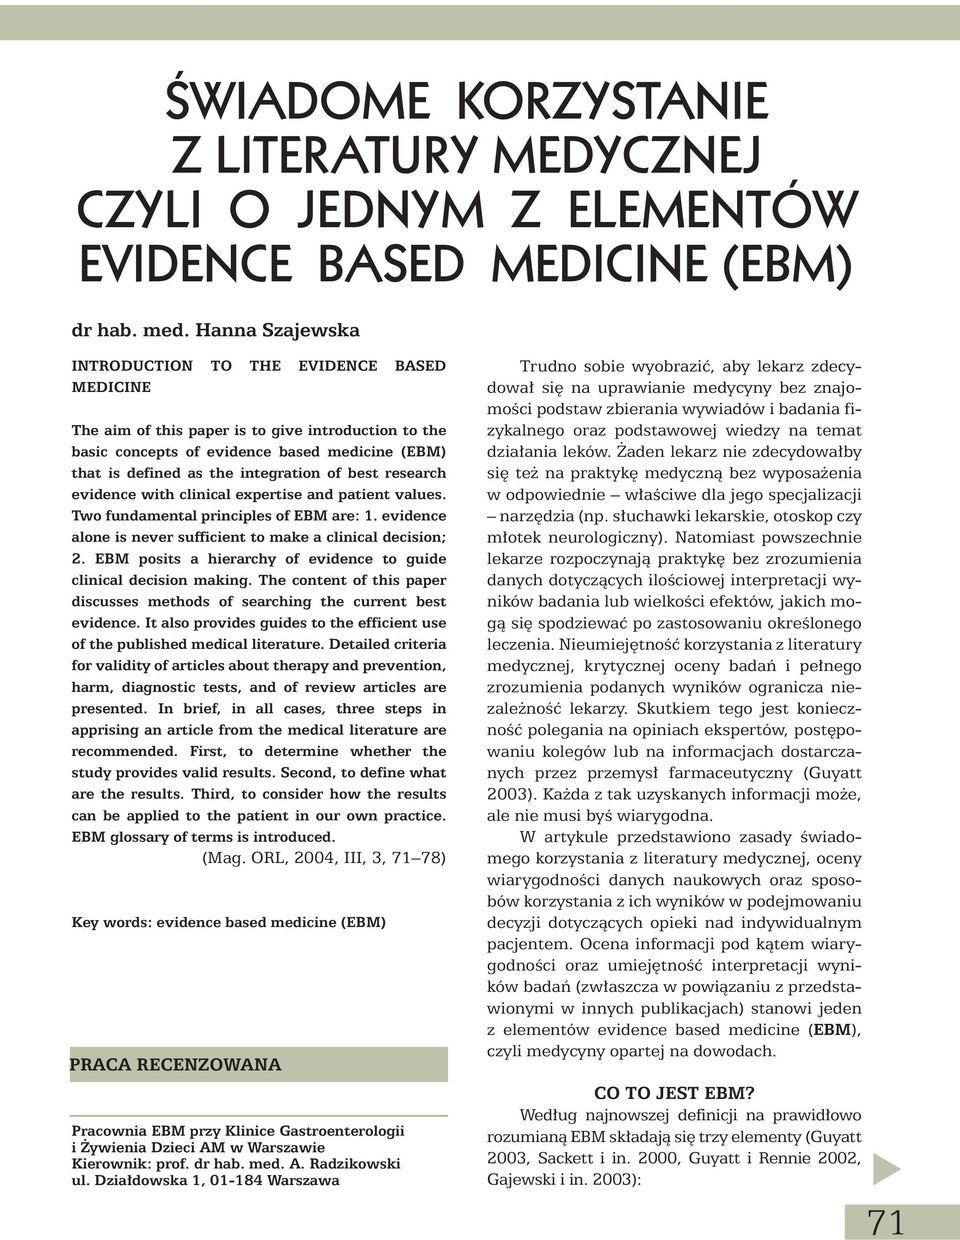 best research evidence with clinical expertise and patient values. Two fundamental principles of EBM are: 1. evidence alone is never sufficient to make a clinical decision; 2.